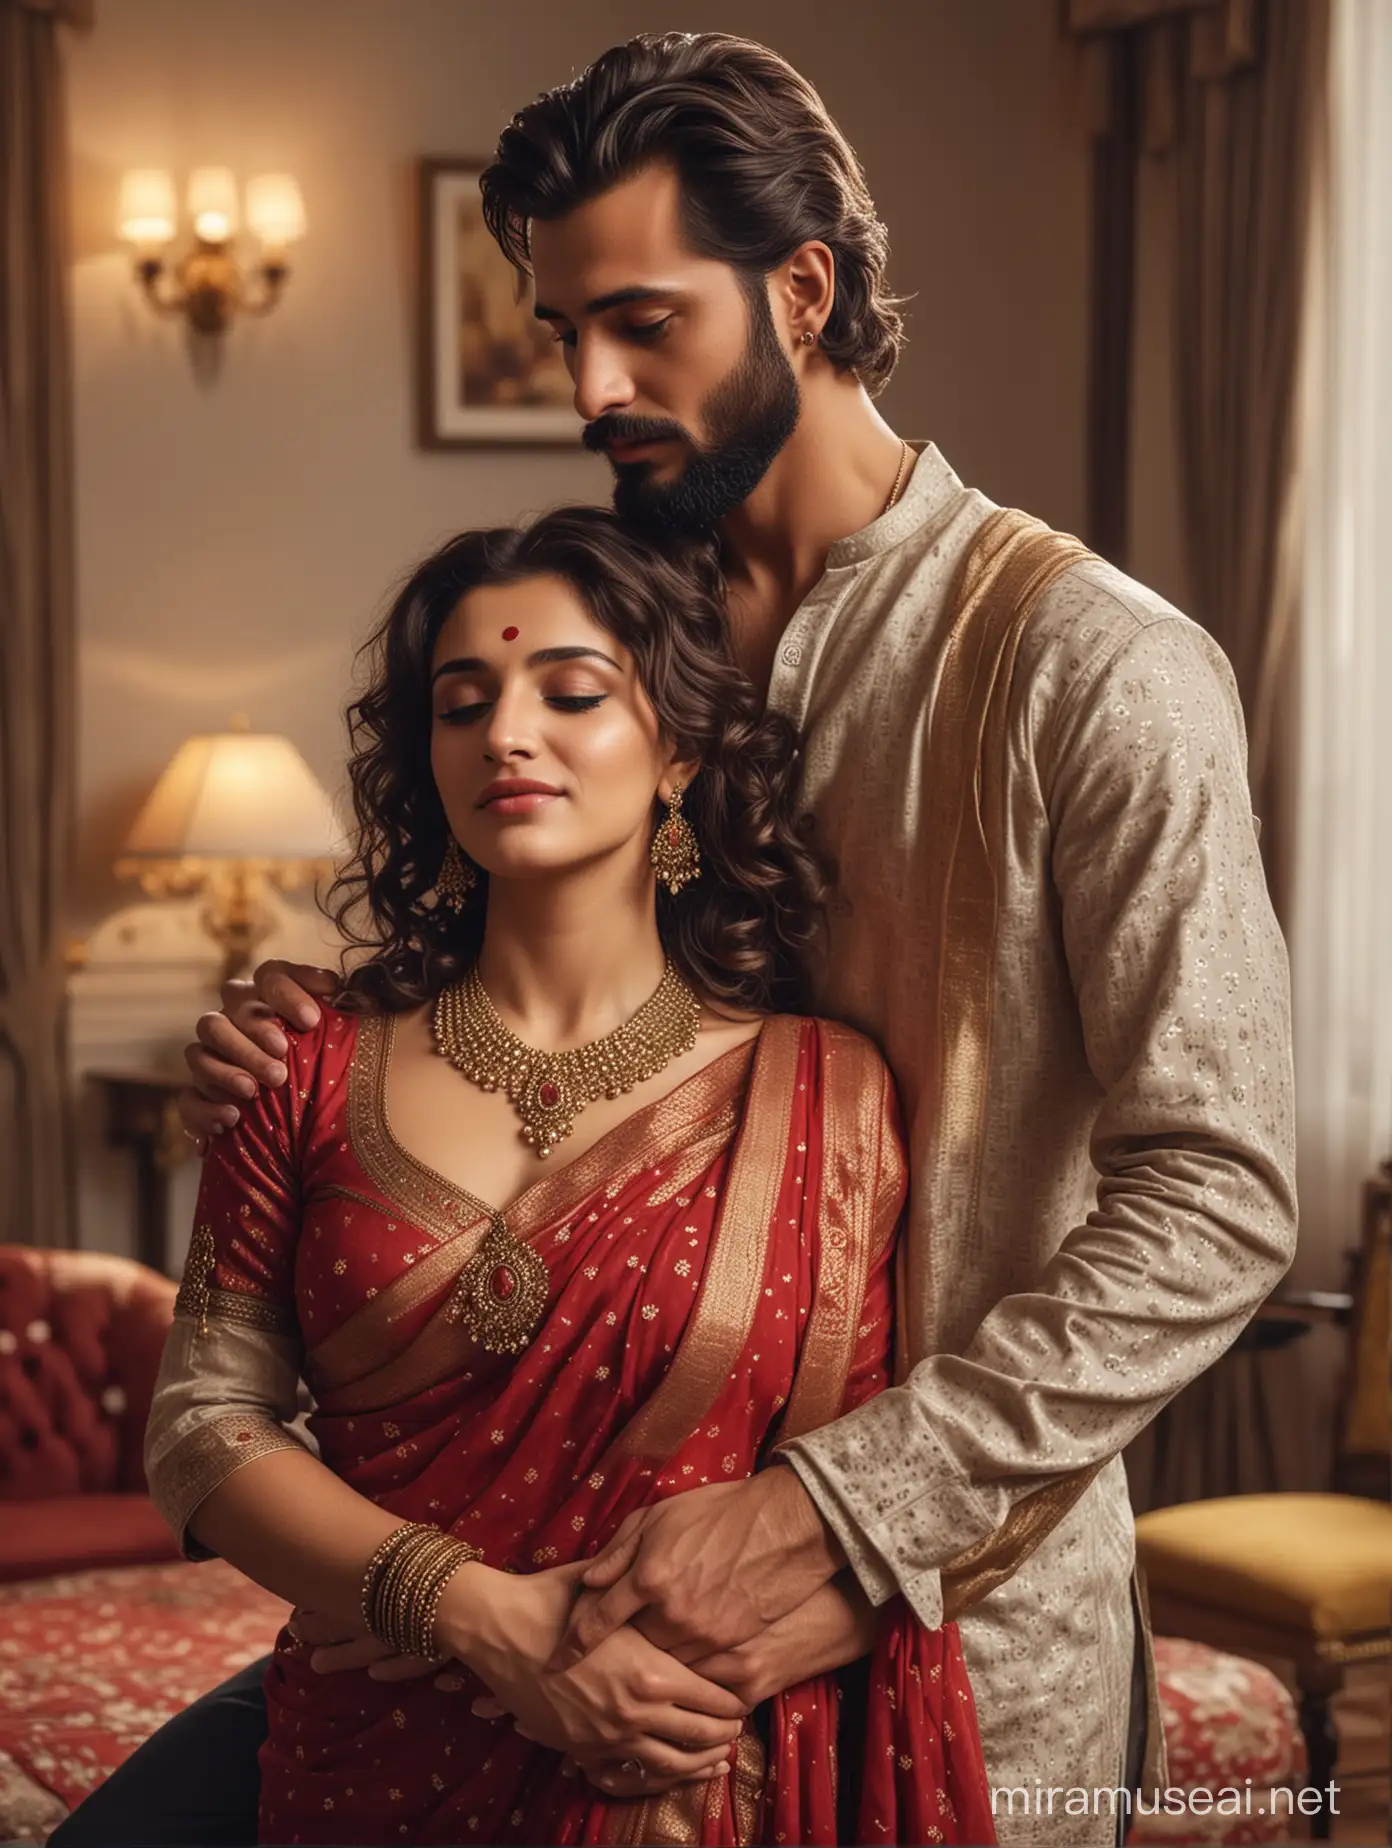 full body view  of most beautiful european couple as most beautiful indian couple, most beautiful girl in elegant bold color saree and long curly hairs, hairs tied  up with hair style stylishly, perfect red dot, necklace,   big wide black  eyes, full face, makeup, low cut neck, girl embracing with emotion and possessive feeling, pressing face to chest of man, emotional crying with longing feeling, innocence and ecstasy, hands around man neck, man comforting her,  man with stylish beard, perfect proper trim hair cut, formals, photo realistic, 4k.
background, spacious modern elite photo room, with luxury sofa set, cream color carpet, elegant interior designs, vintage lamps, romantic reunion ambience, photorealistic, vibrant colors, intricate details, 8k.